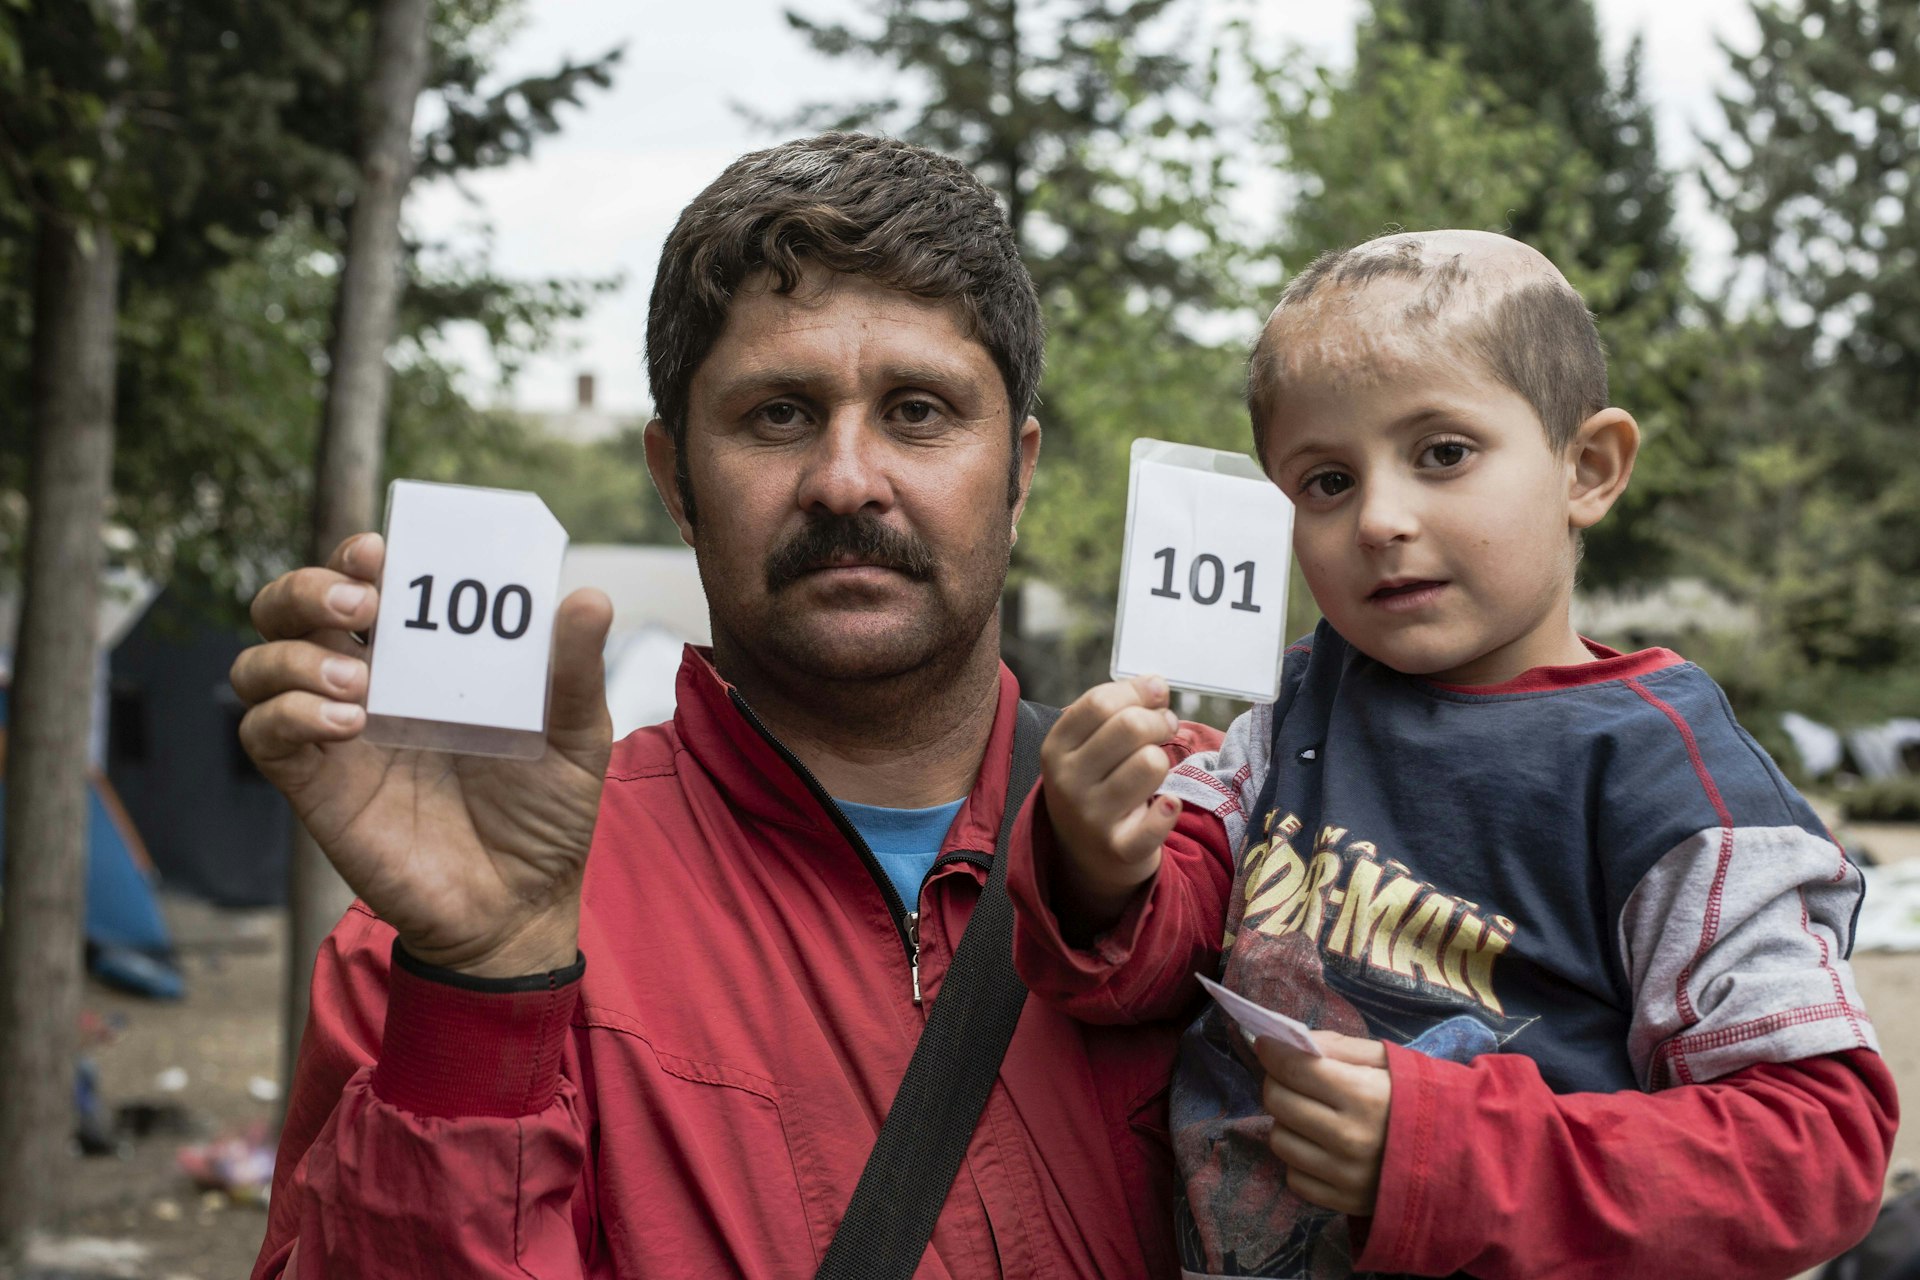 Abdul with his son who was injured in a barrell bomb attack in Syria. As part of registration in Serbia they are given a number in line. Their next step in Hungary.